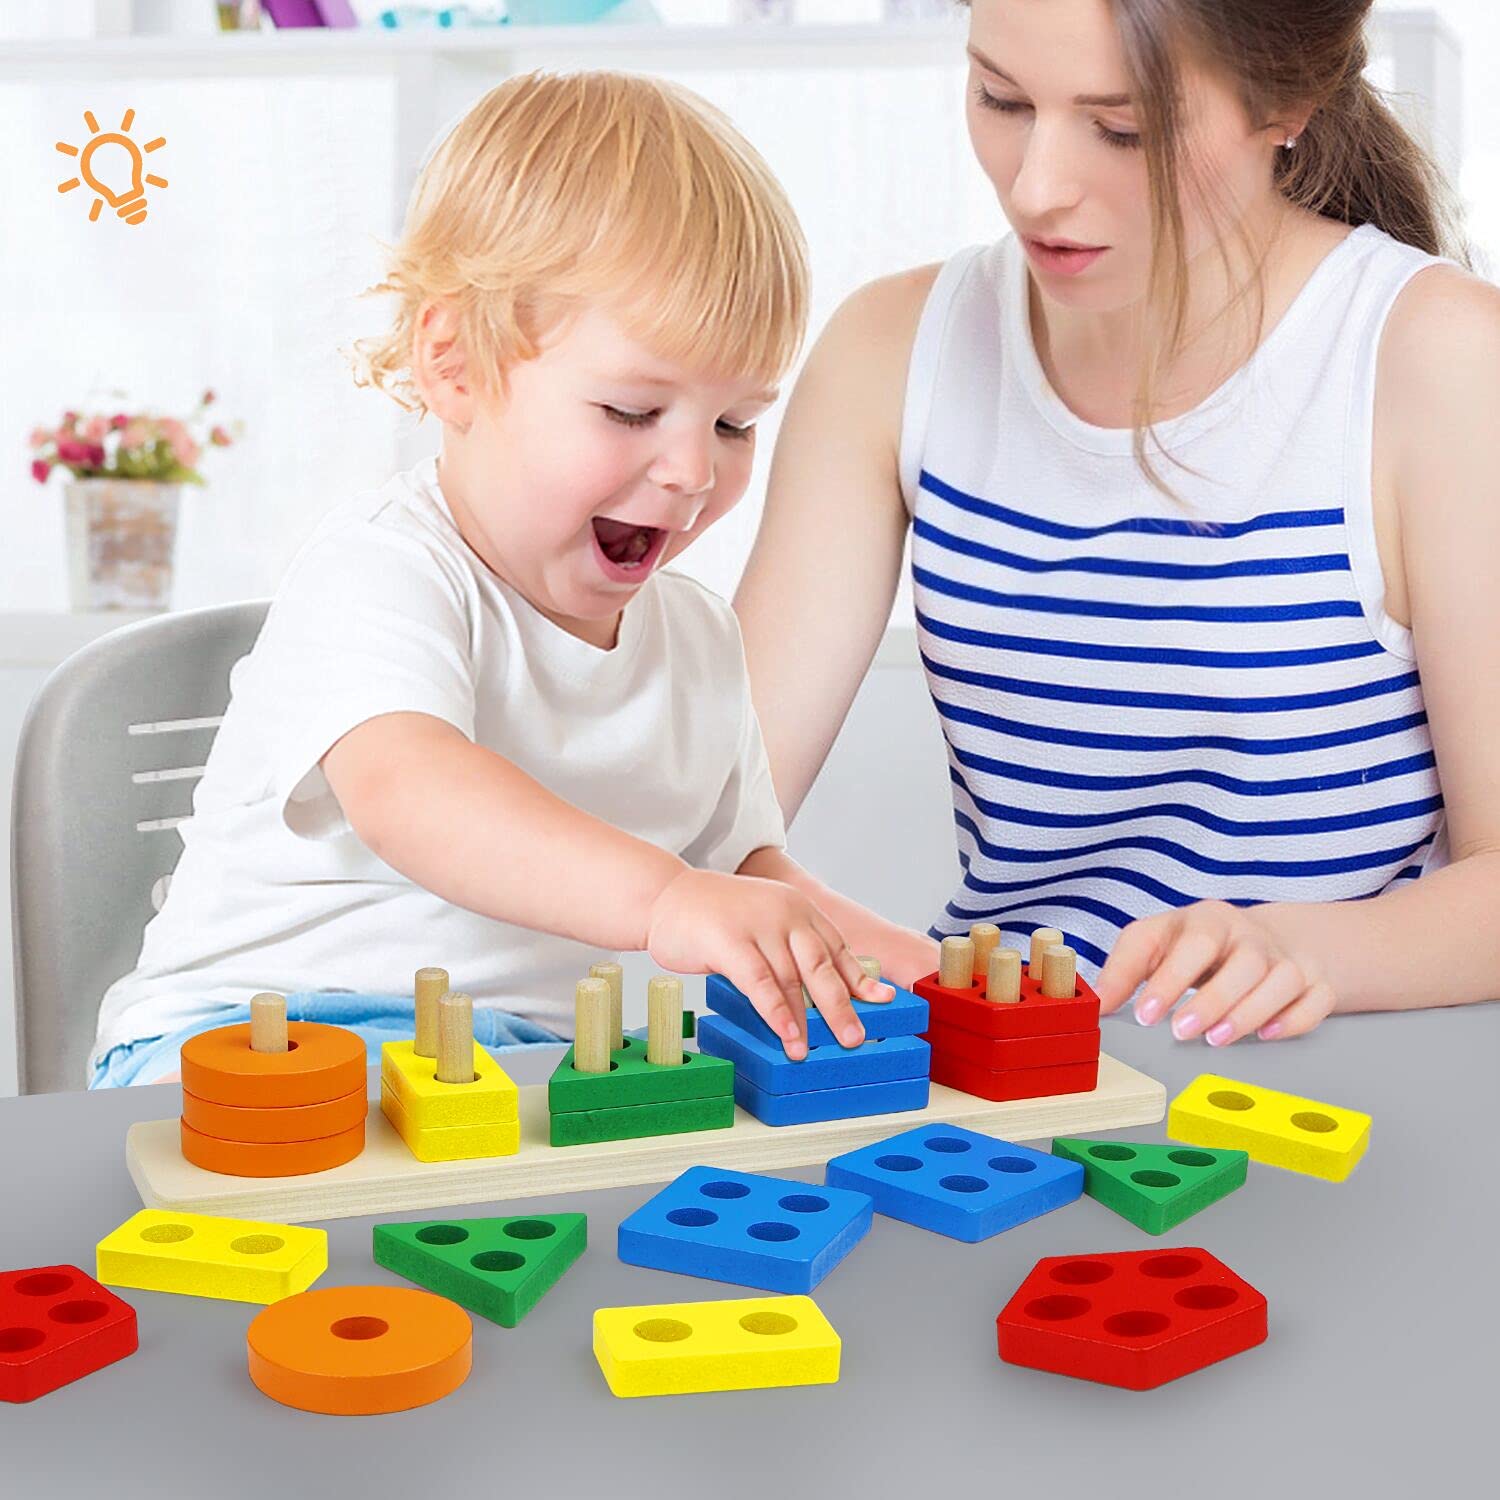 Montessori Toys for 1 to 3-Year-Old Boys Girls Toddlers, Wooden Sorting & Stacking Toys for Toddlers and Kids Preschool, Educational Toys, Color Recognition Stacker Shape Sorter, Learning Puzzles Gift